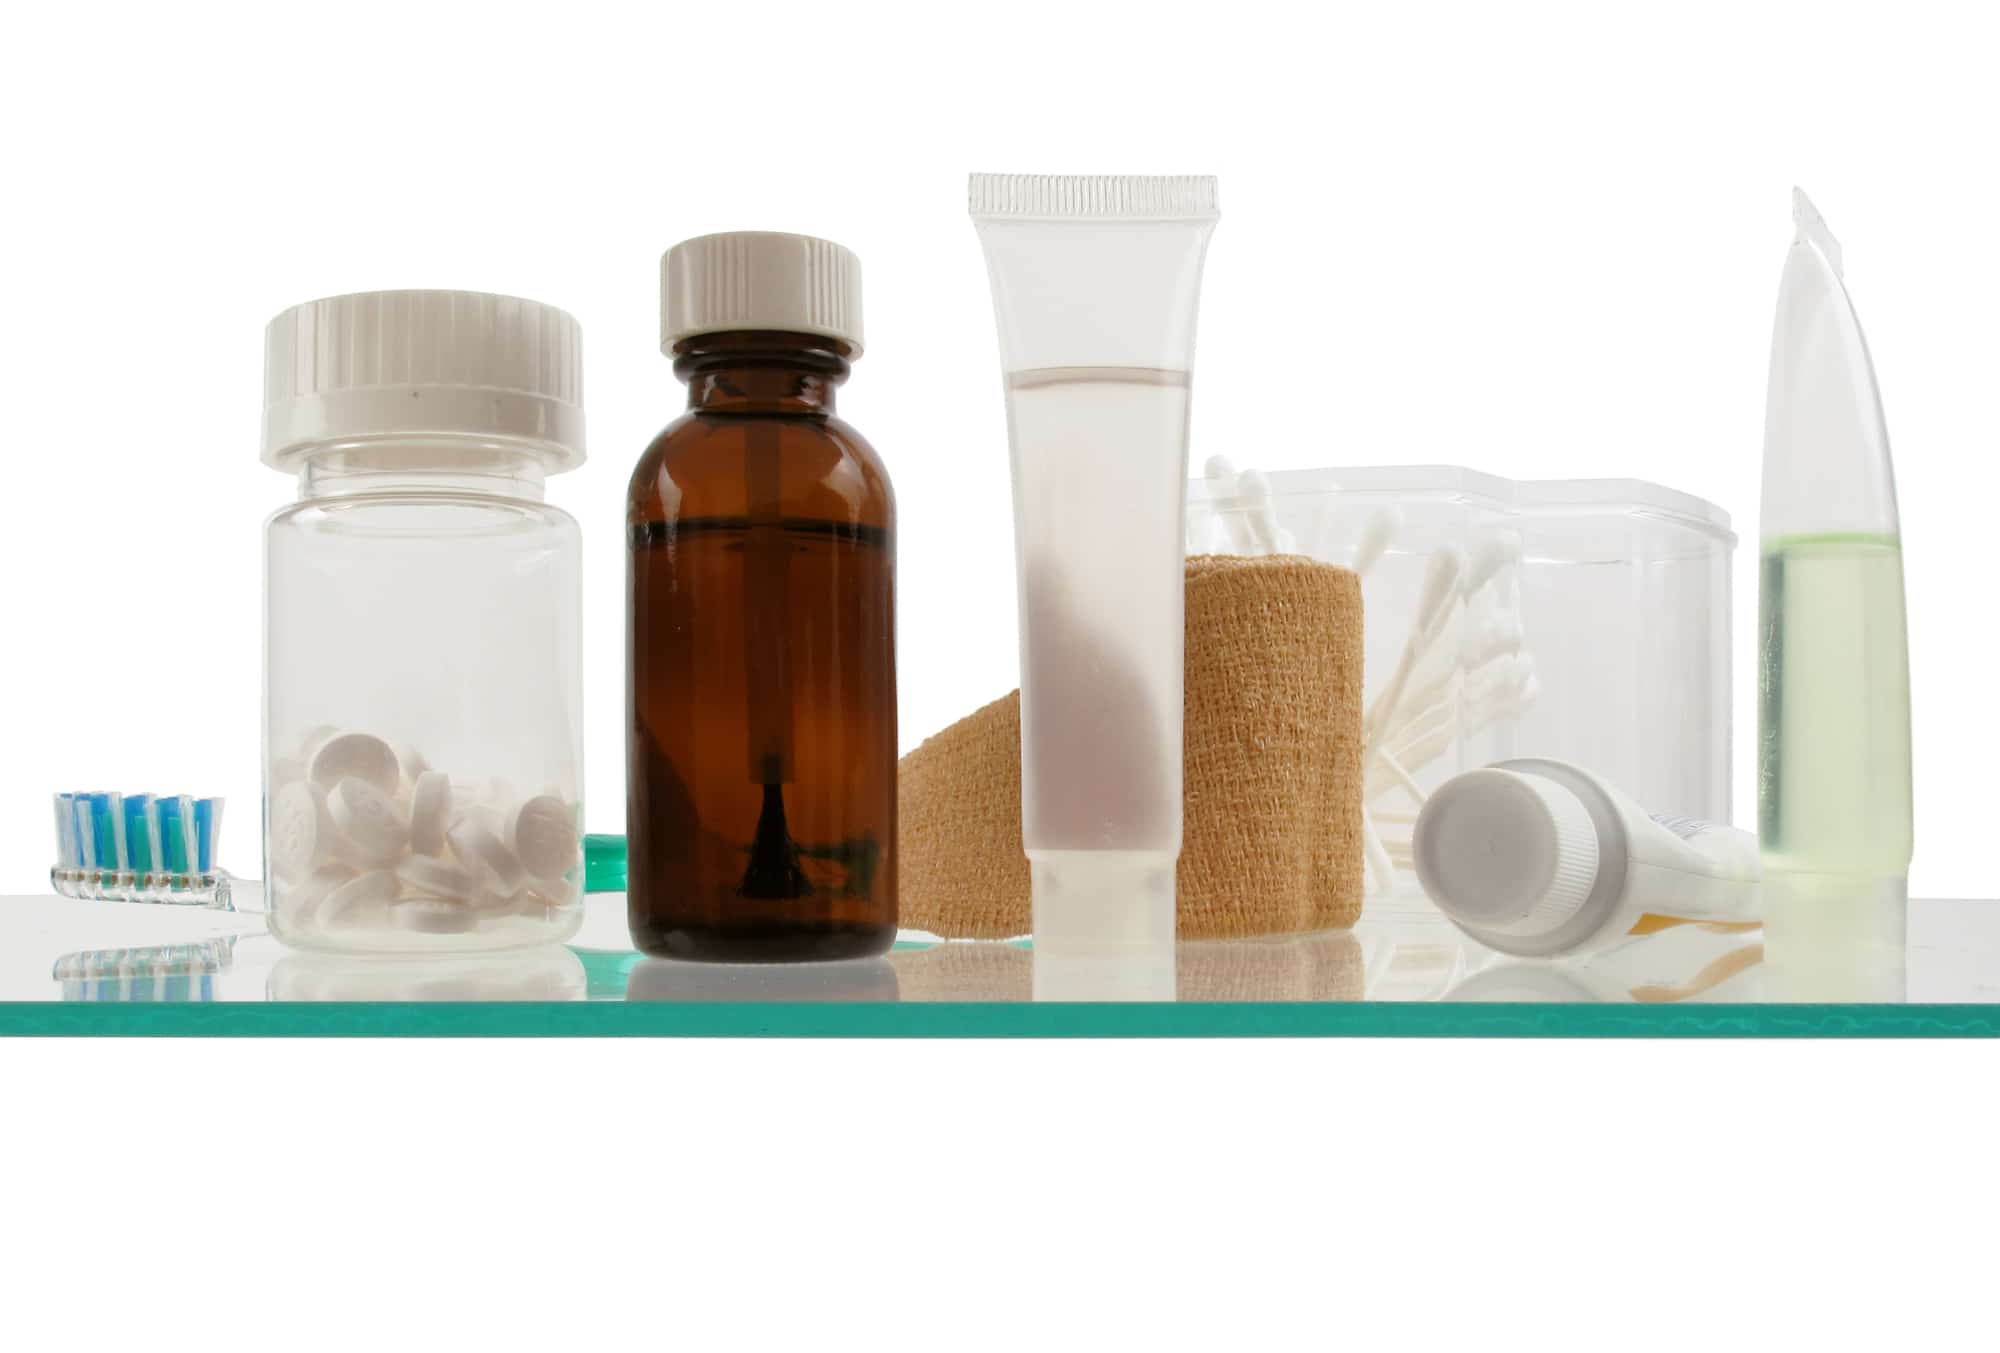 Know The Risks Hiding In Your Medicine Cabinet